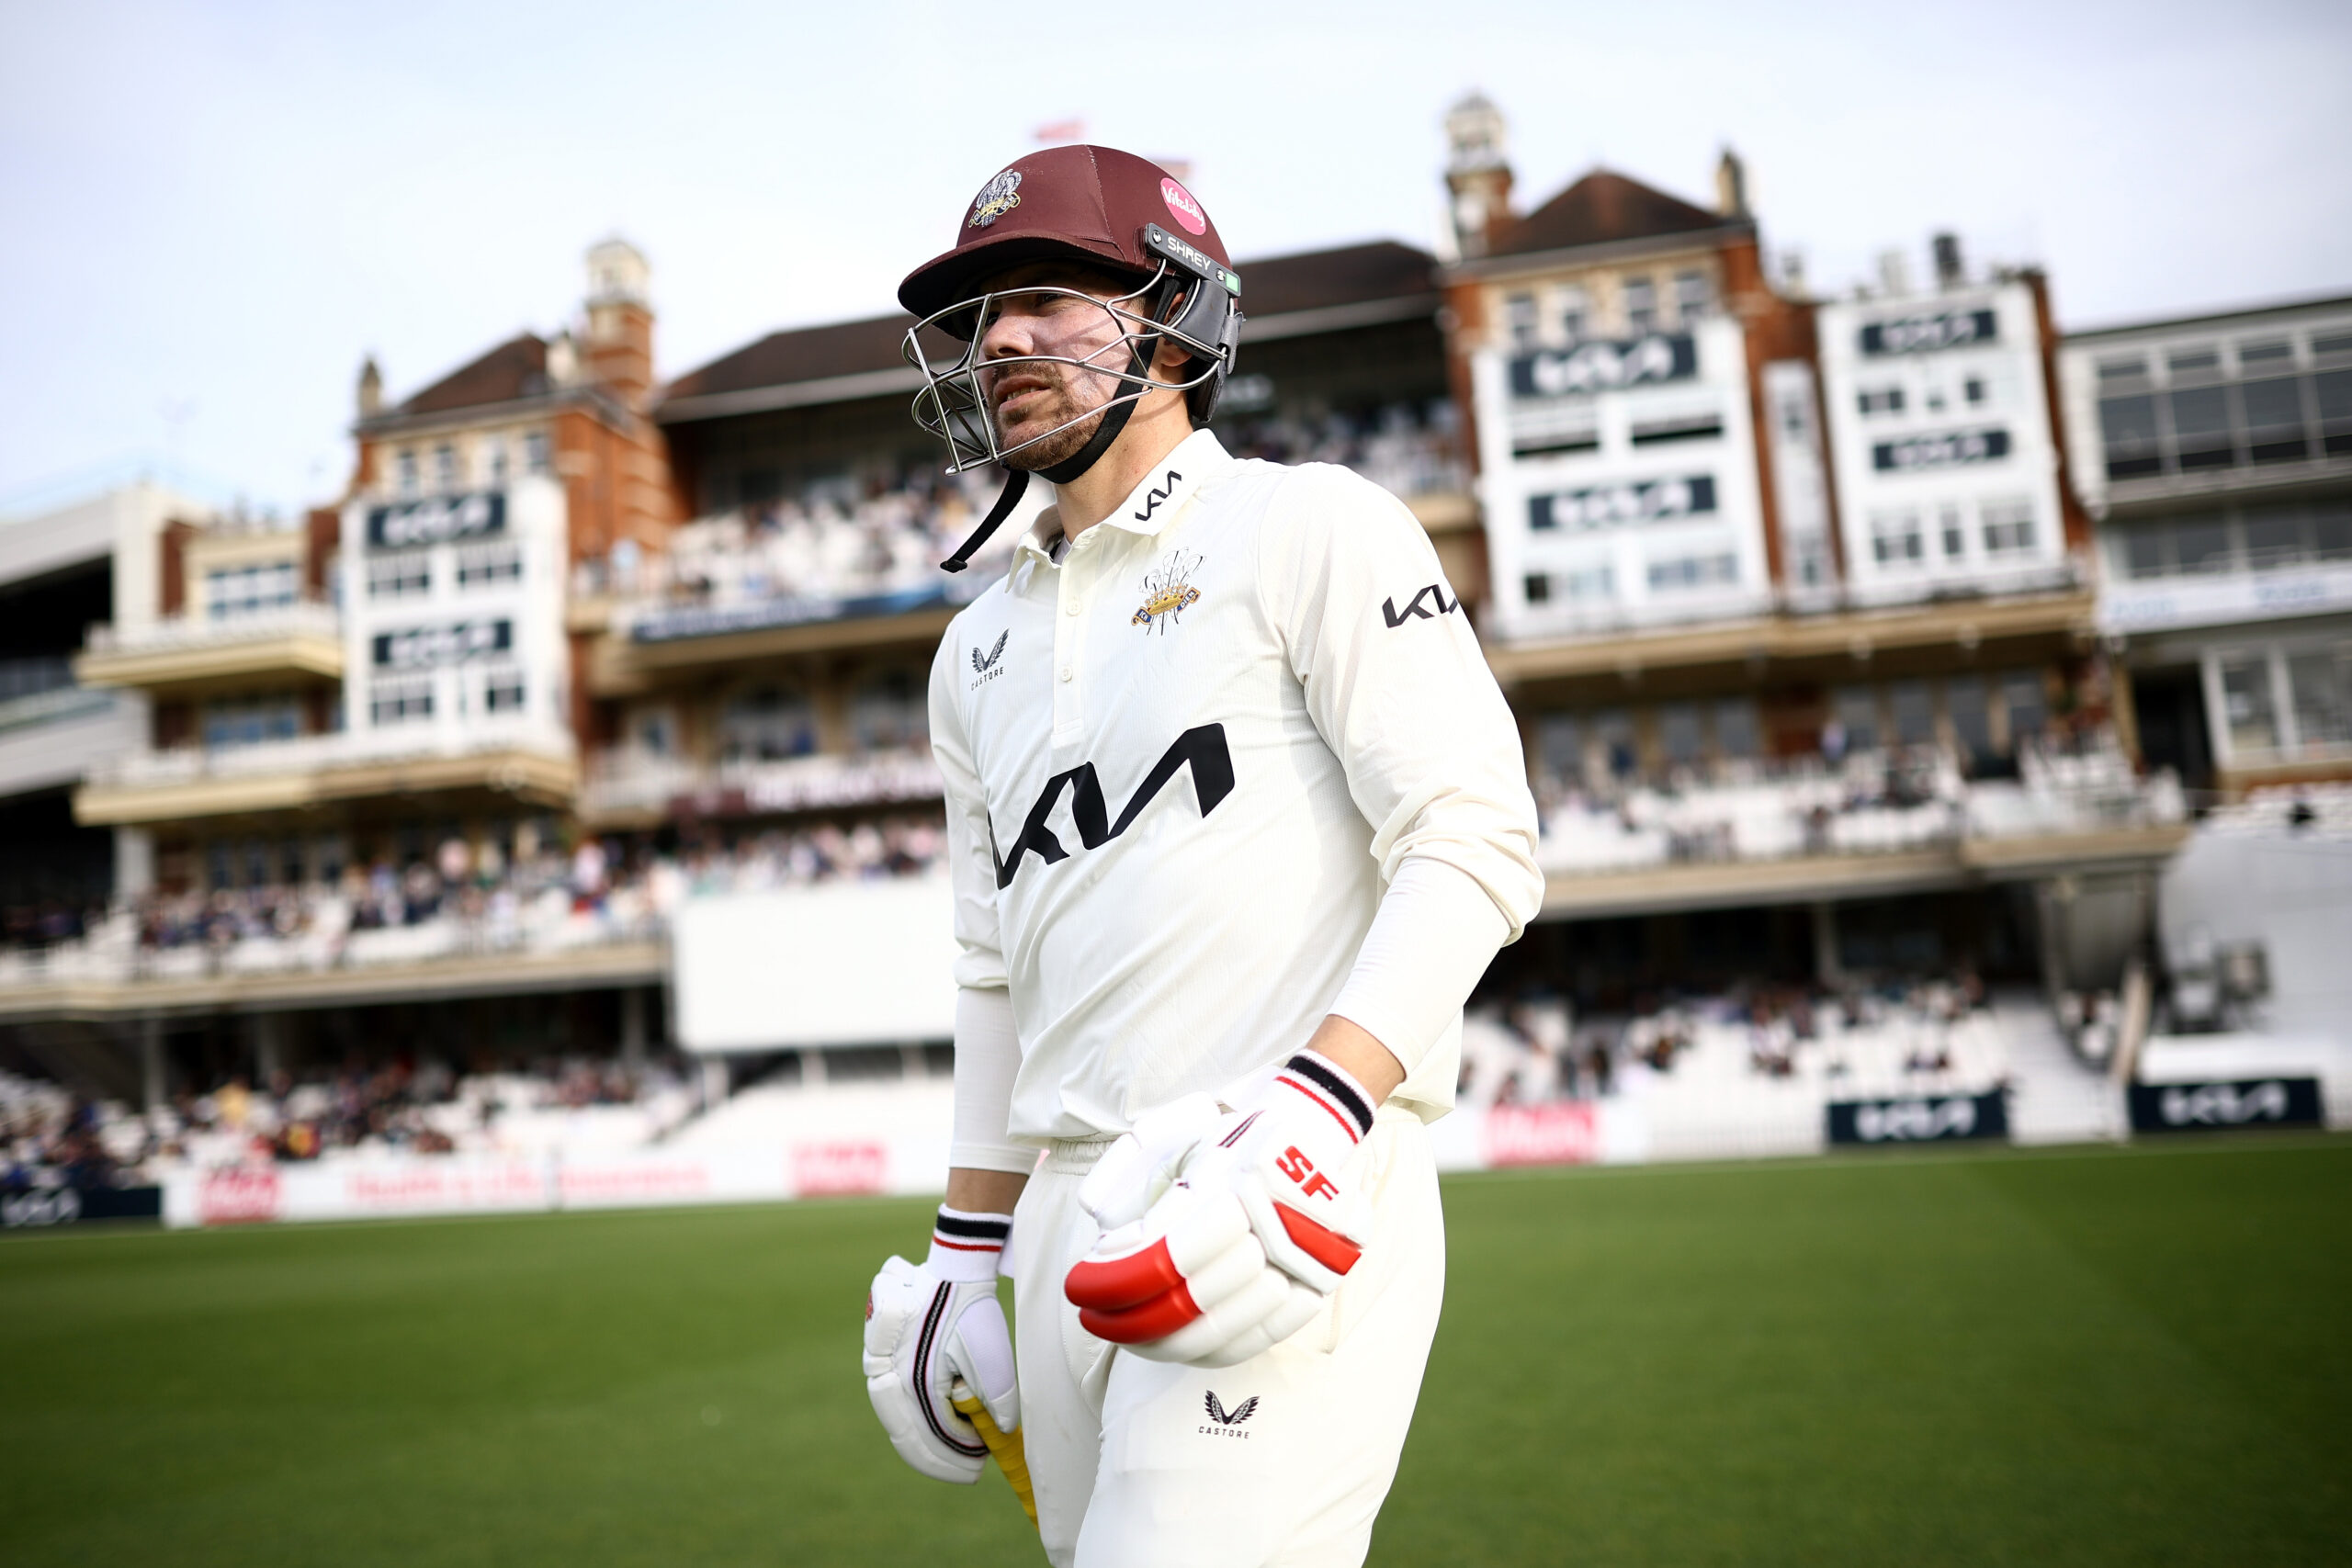 Two centuries put Surrey in control on day two